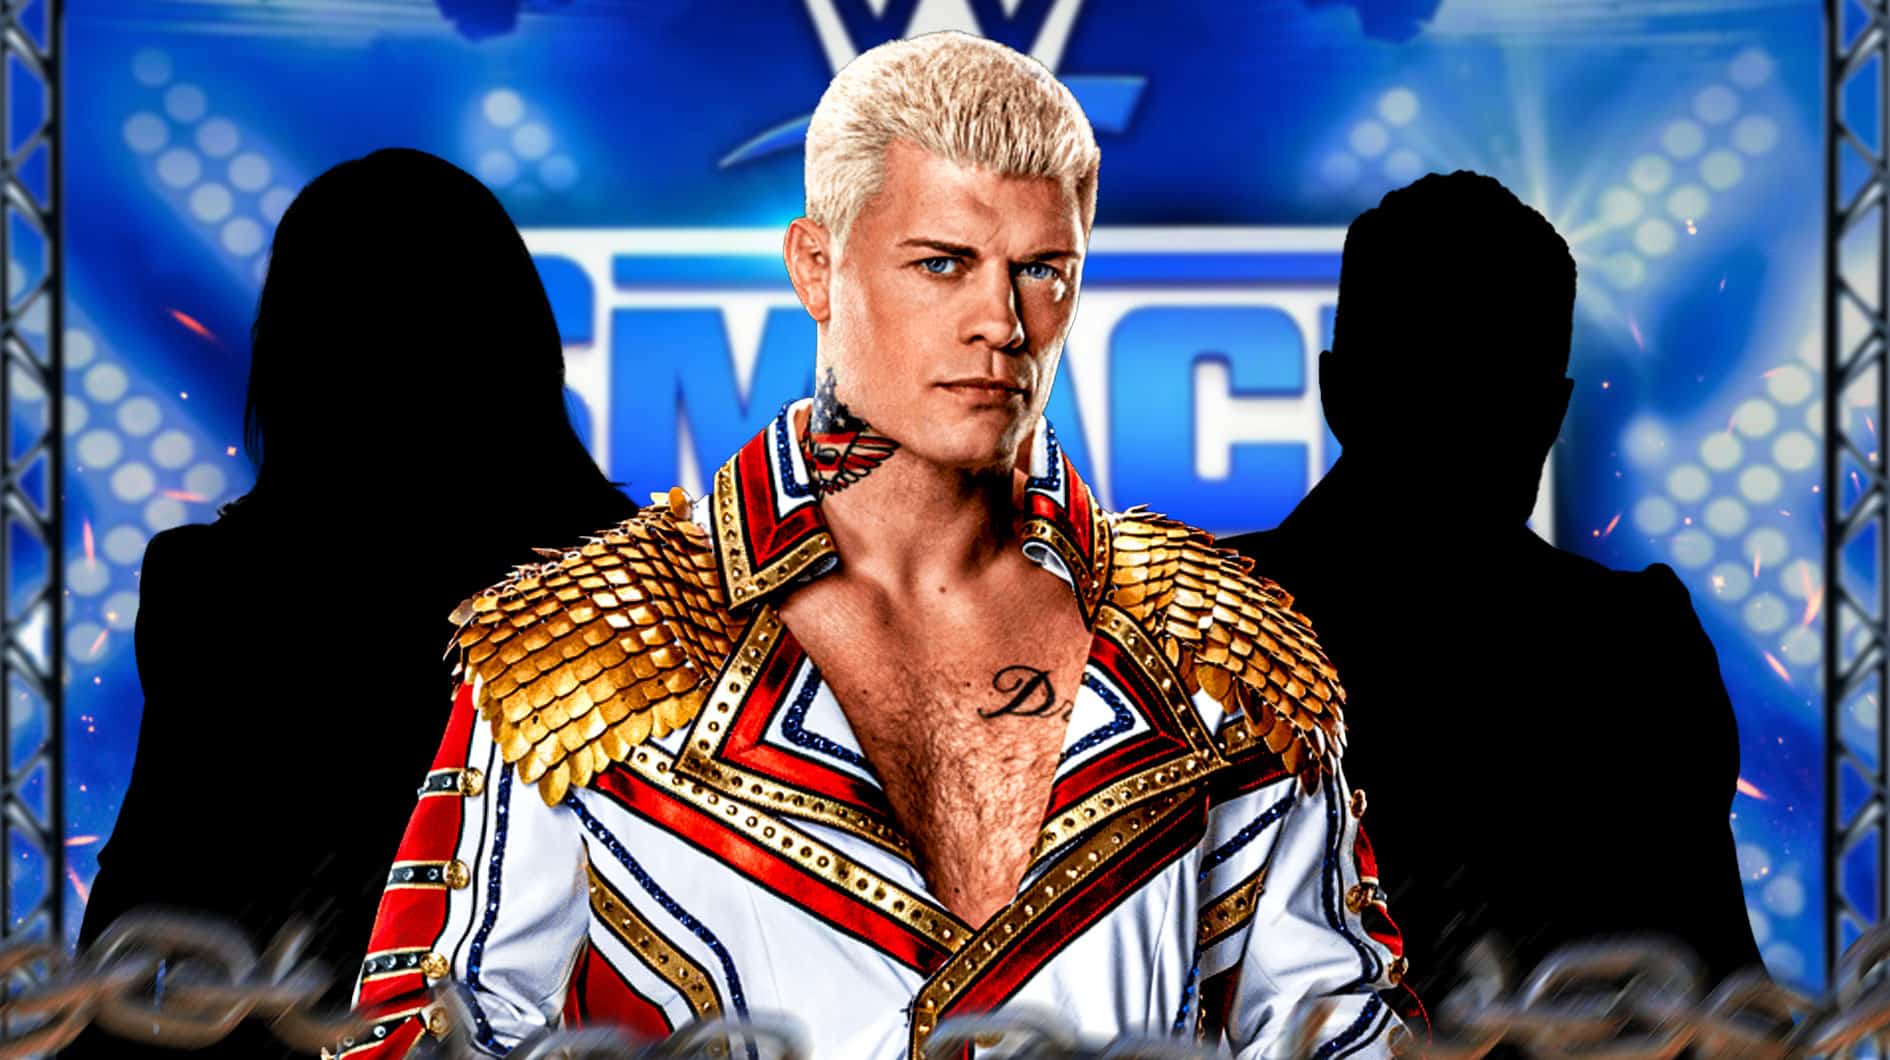 Cody Rhodes names two foes he'd love to wrestle on a future WWE Premium Live Event